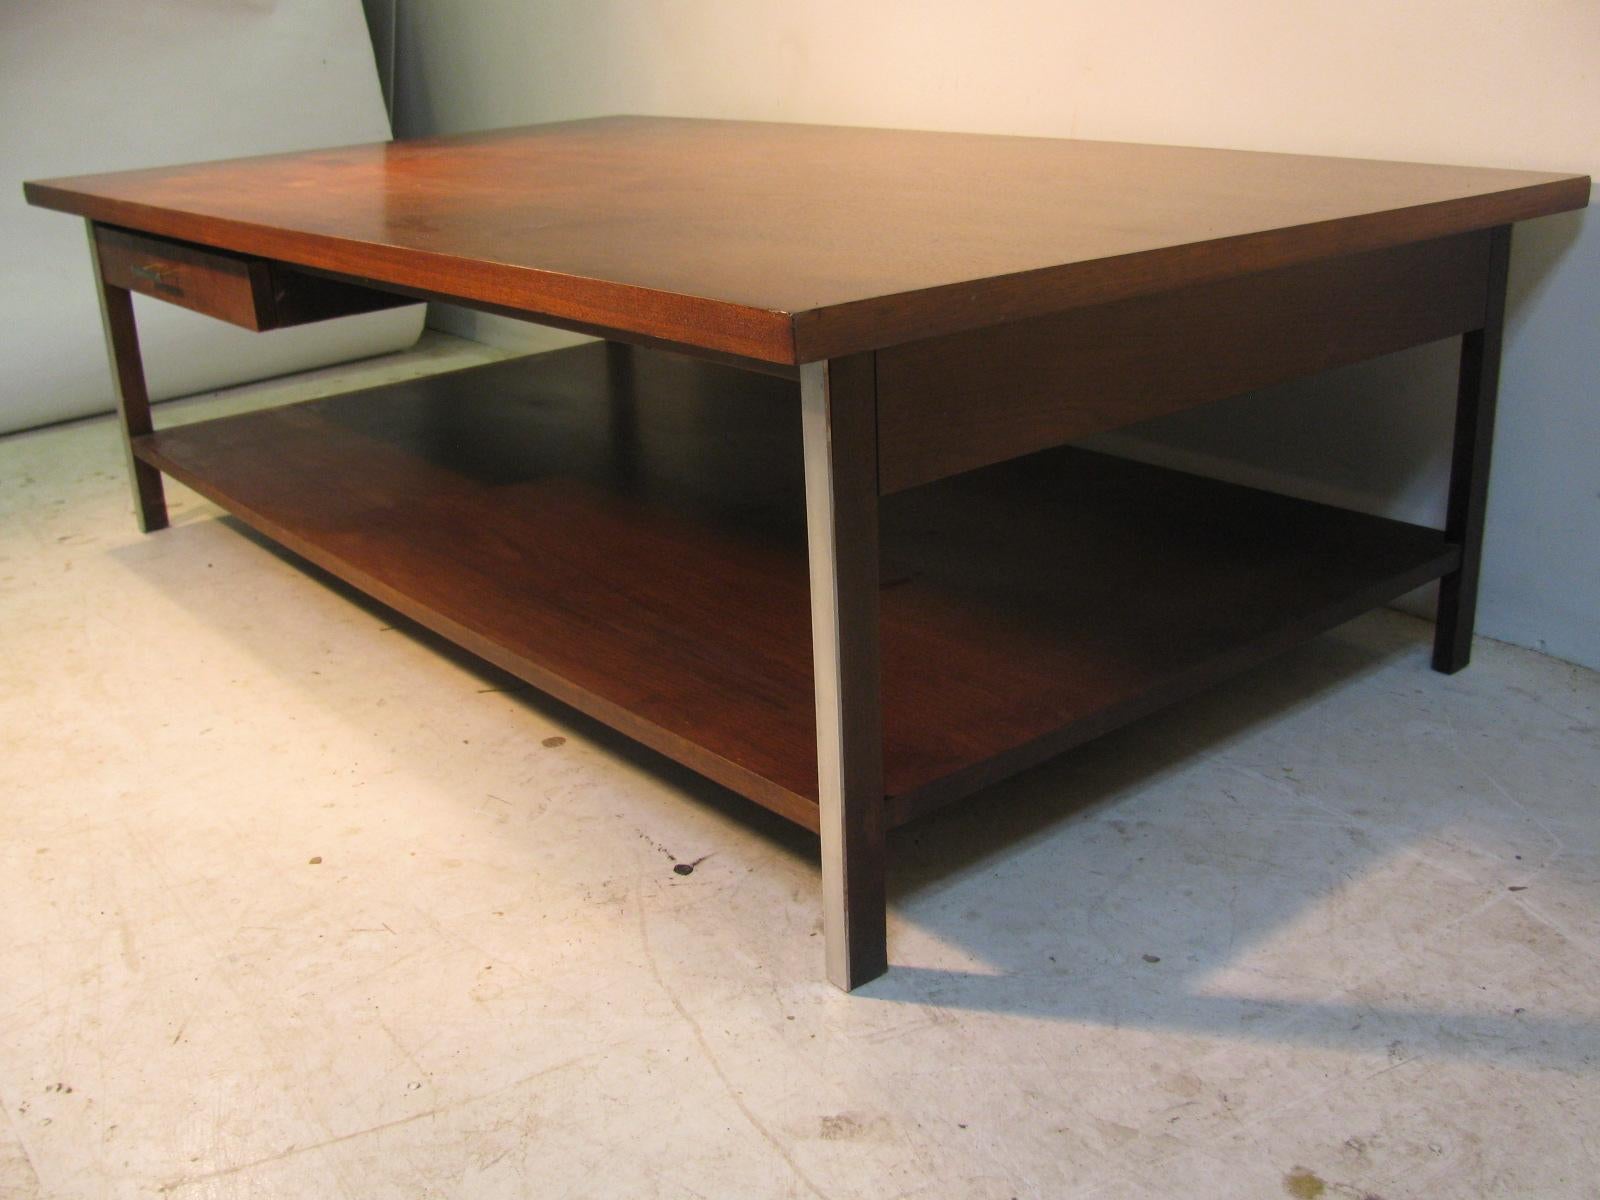 Mid-20th Century Mid-Century Modern Cocktail Table by Paul McCobb for Calvin